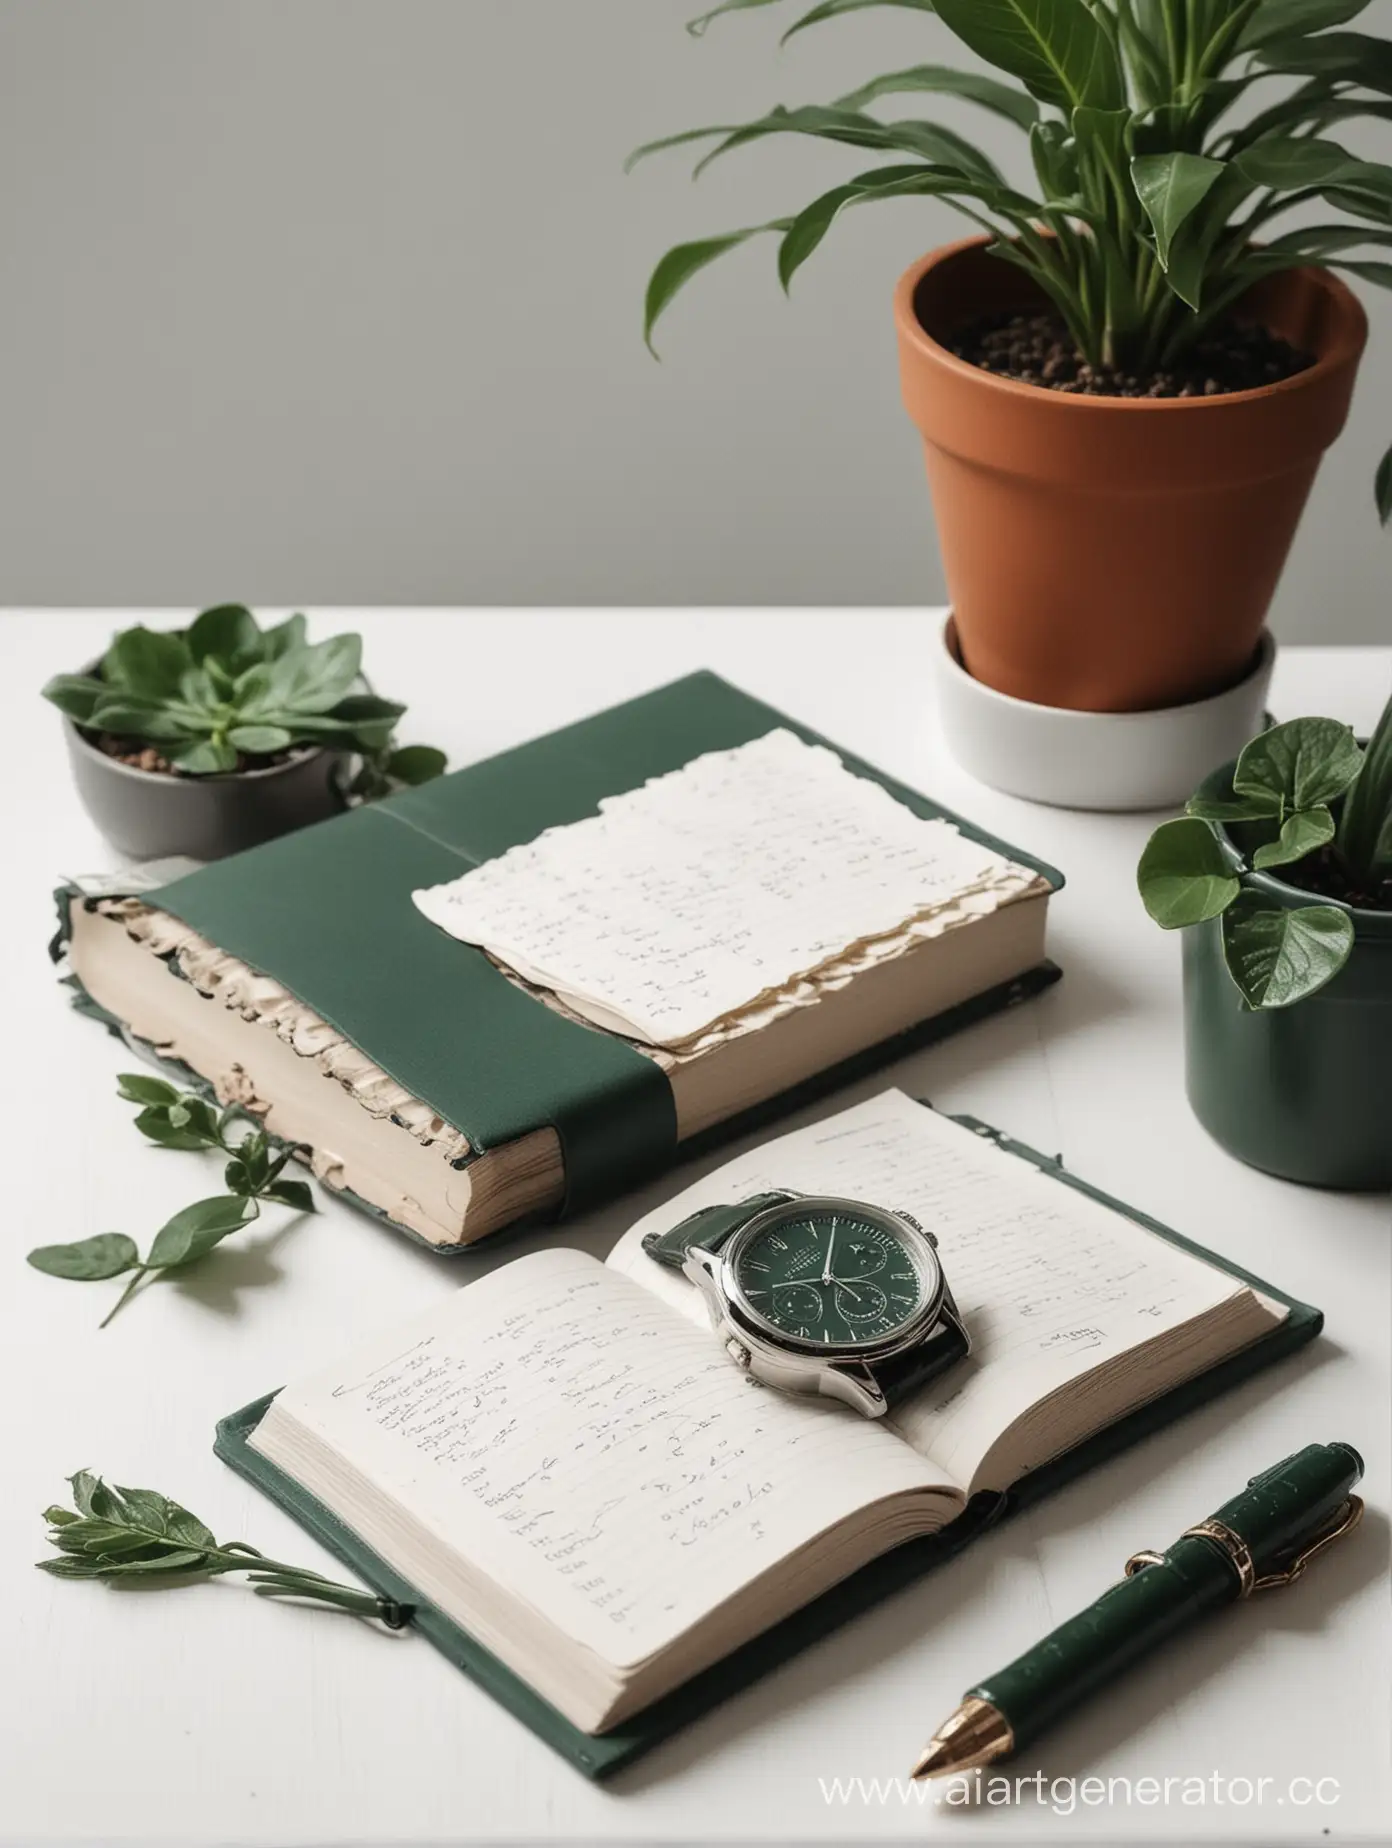 Dark-Green-Diary-and-Watches-on-White-Table-with-Plant-Pot